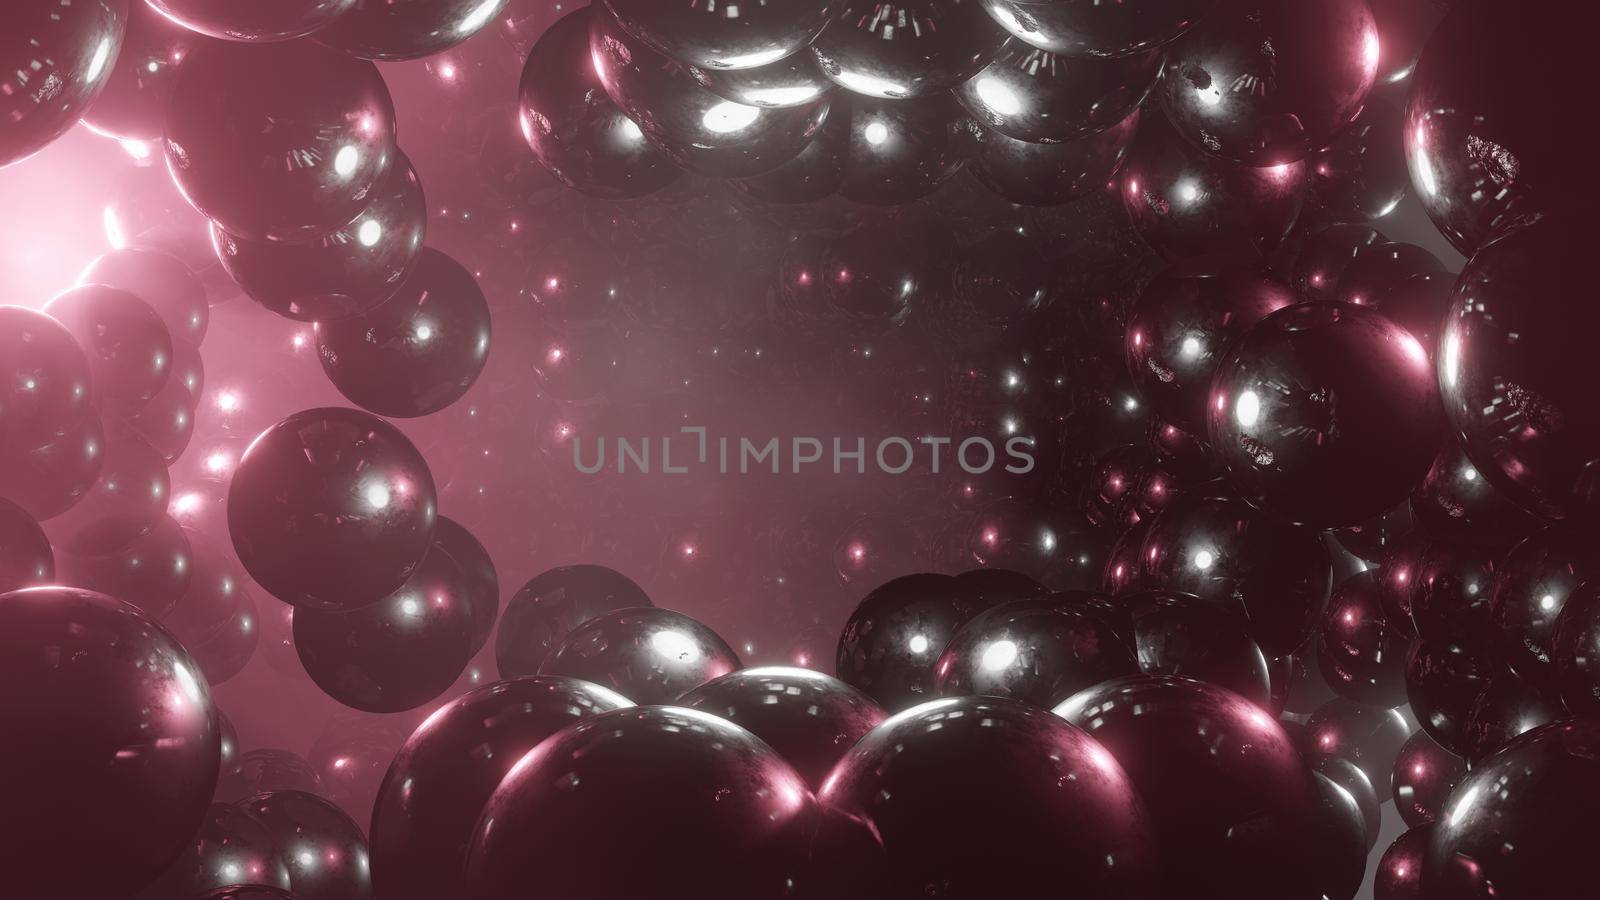 Abstract 3d render, dark red background design with spheres 3d render by yay_lmrb